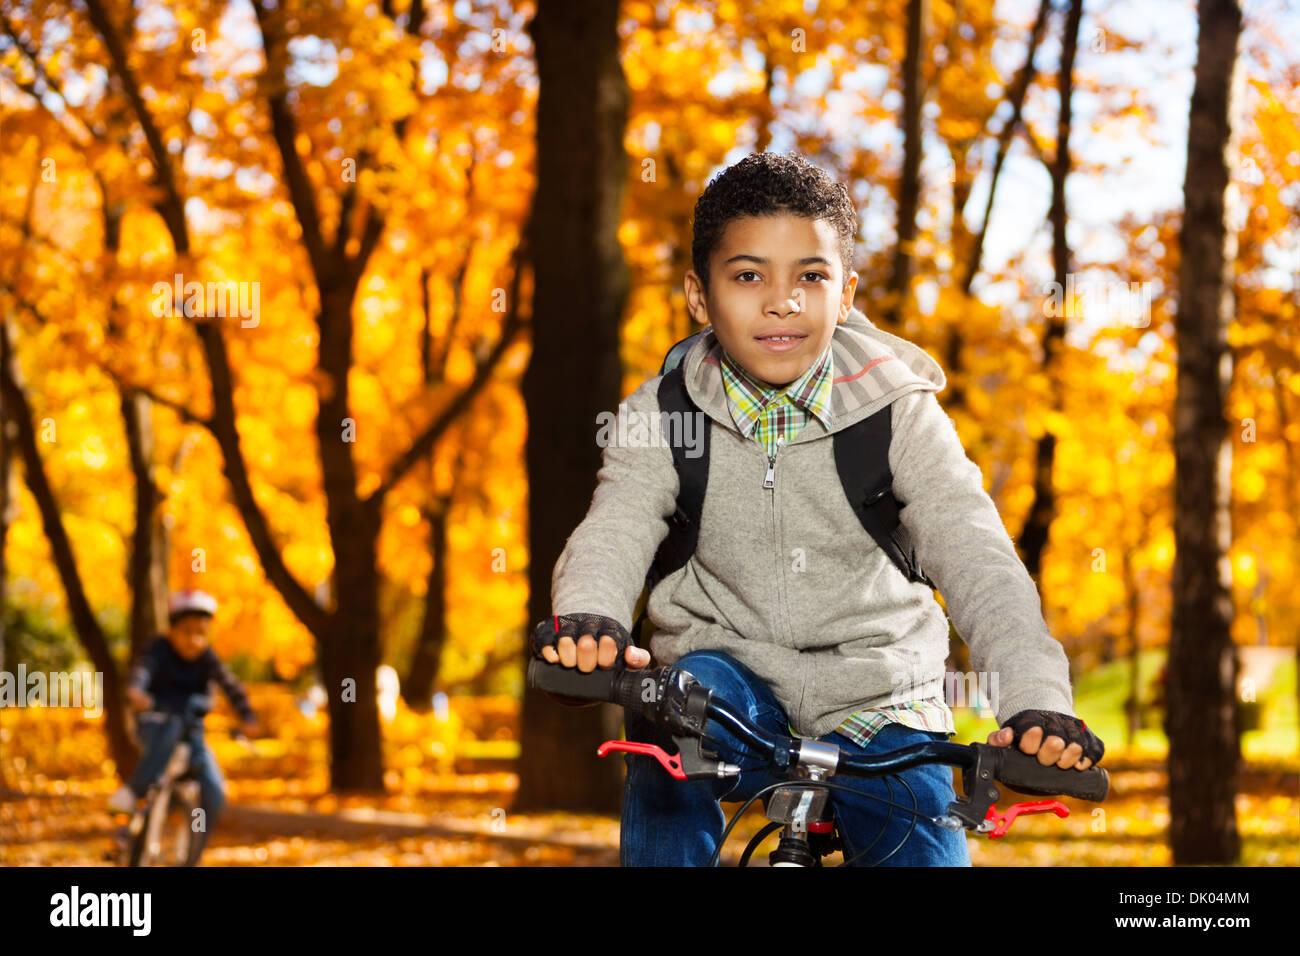 Close portrait of a boy on the bicycle riding in autumn park with orange leaves Stock Photo